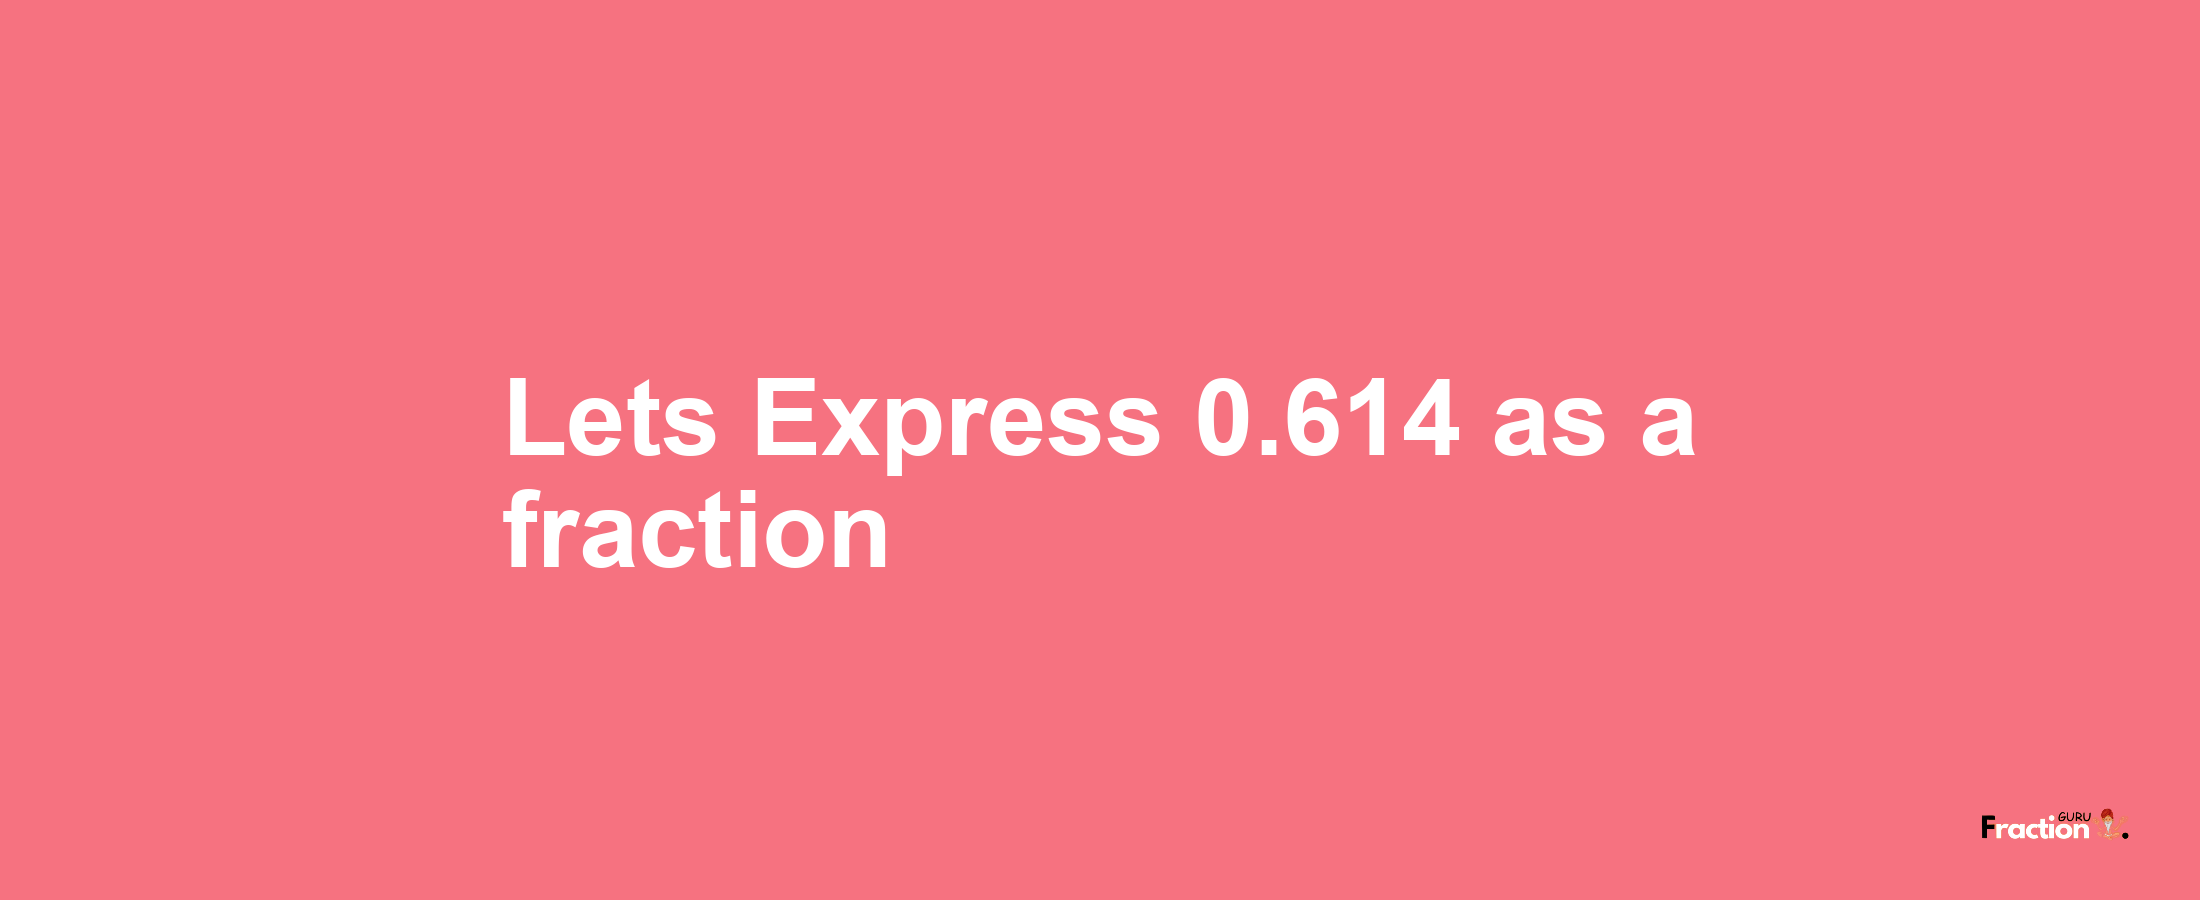 Lets Express 0.614 as afraction